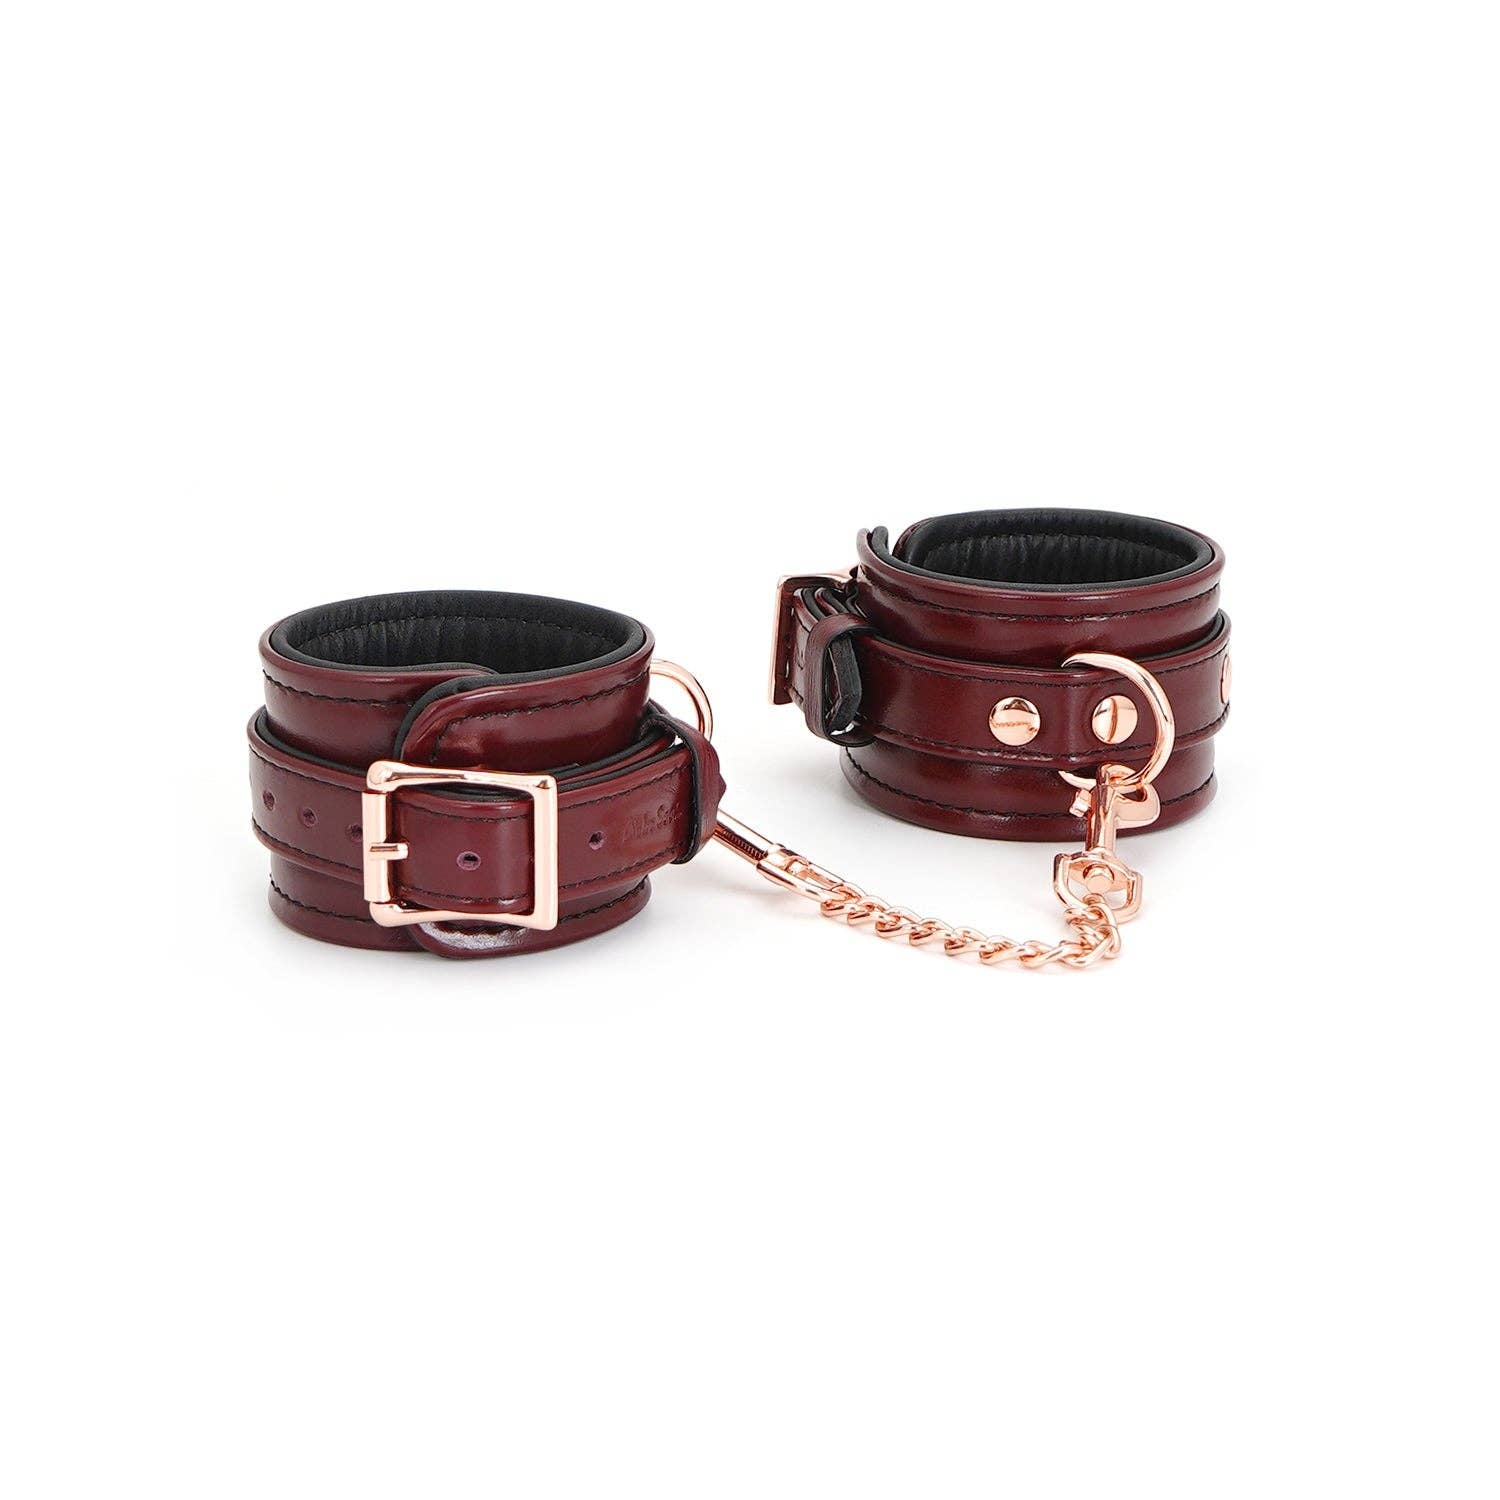 Leather Handcuffs with Rose Gold Hardware - Wine Red